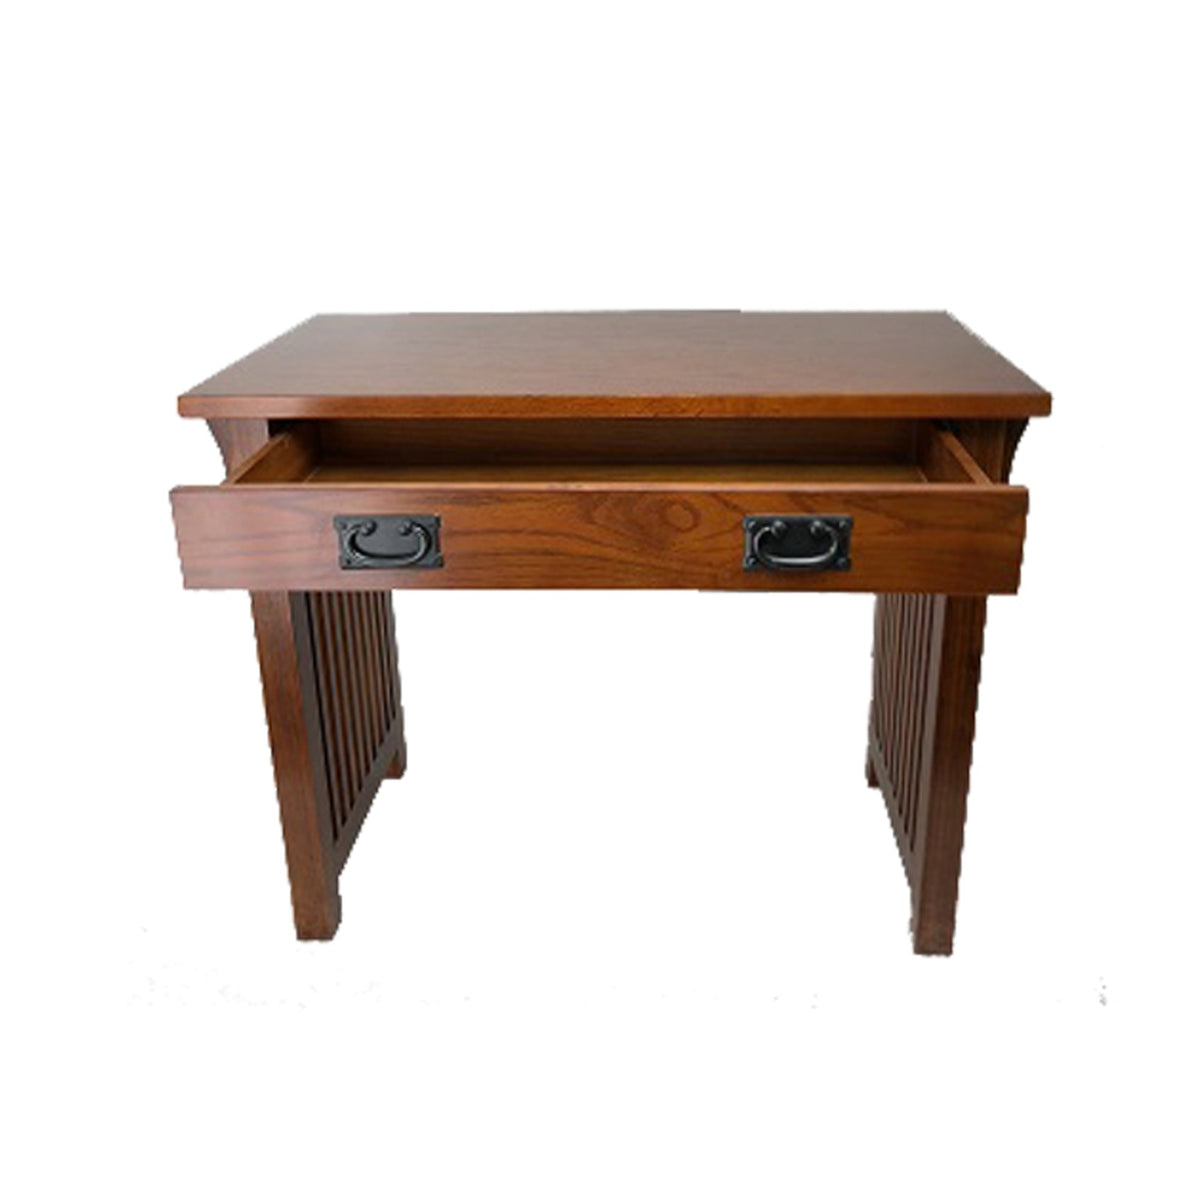 Wooden Frame Writing Desk with 1 Drawer and Slatted Sides, Brown - BM210129